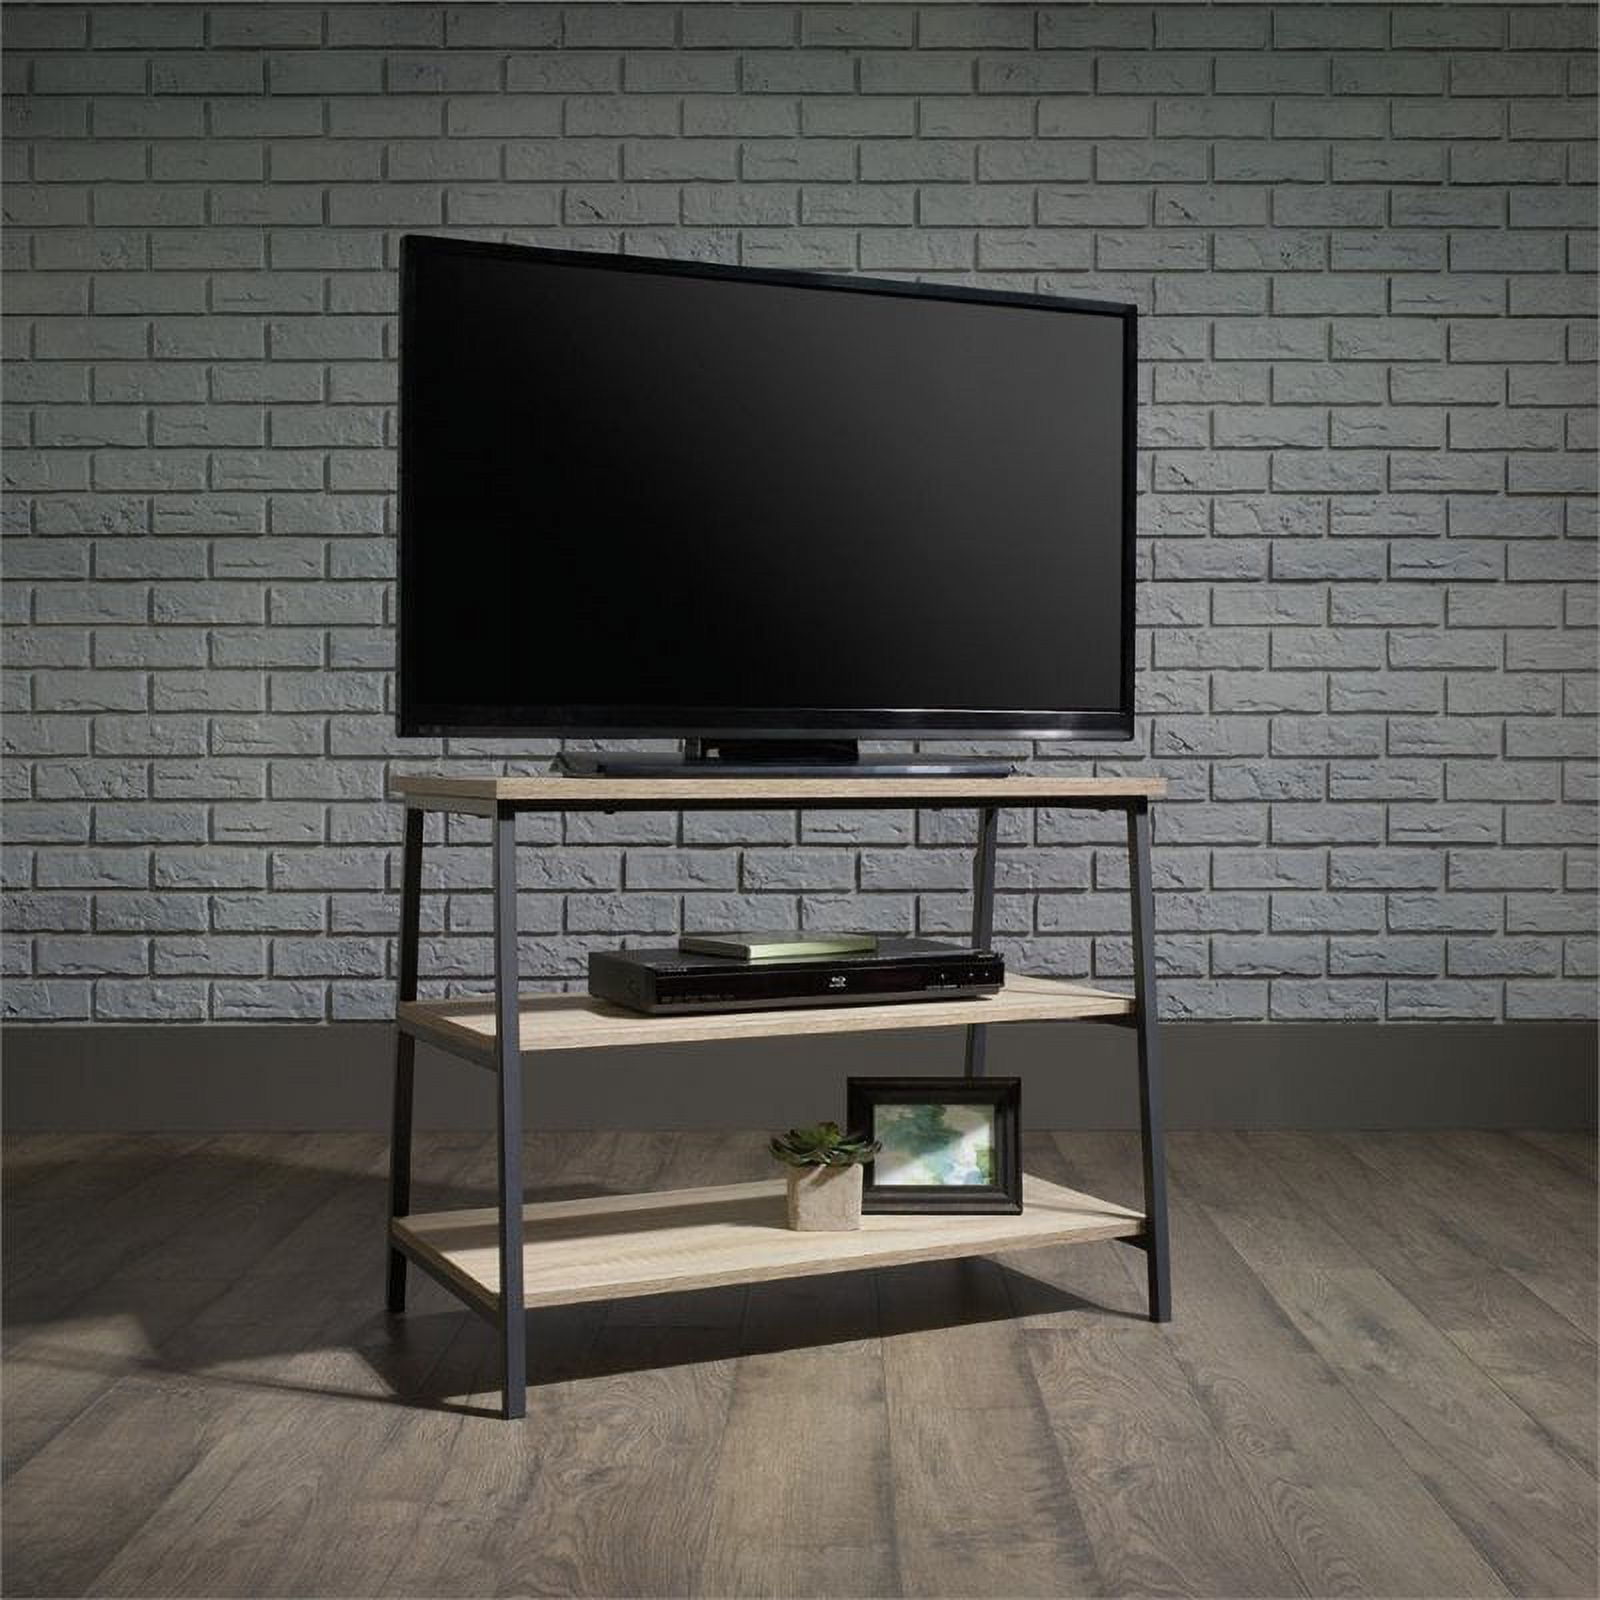 Home Square 4 Piece Living Room Set with Coffee Table and TV Stand with 2 Nightstand in Charter Oak and Dark Metal Accents - image 2 of 4